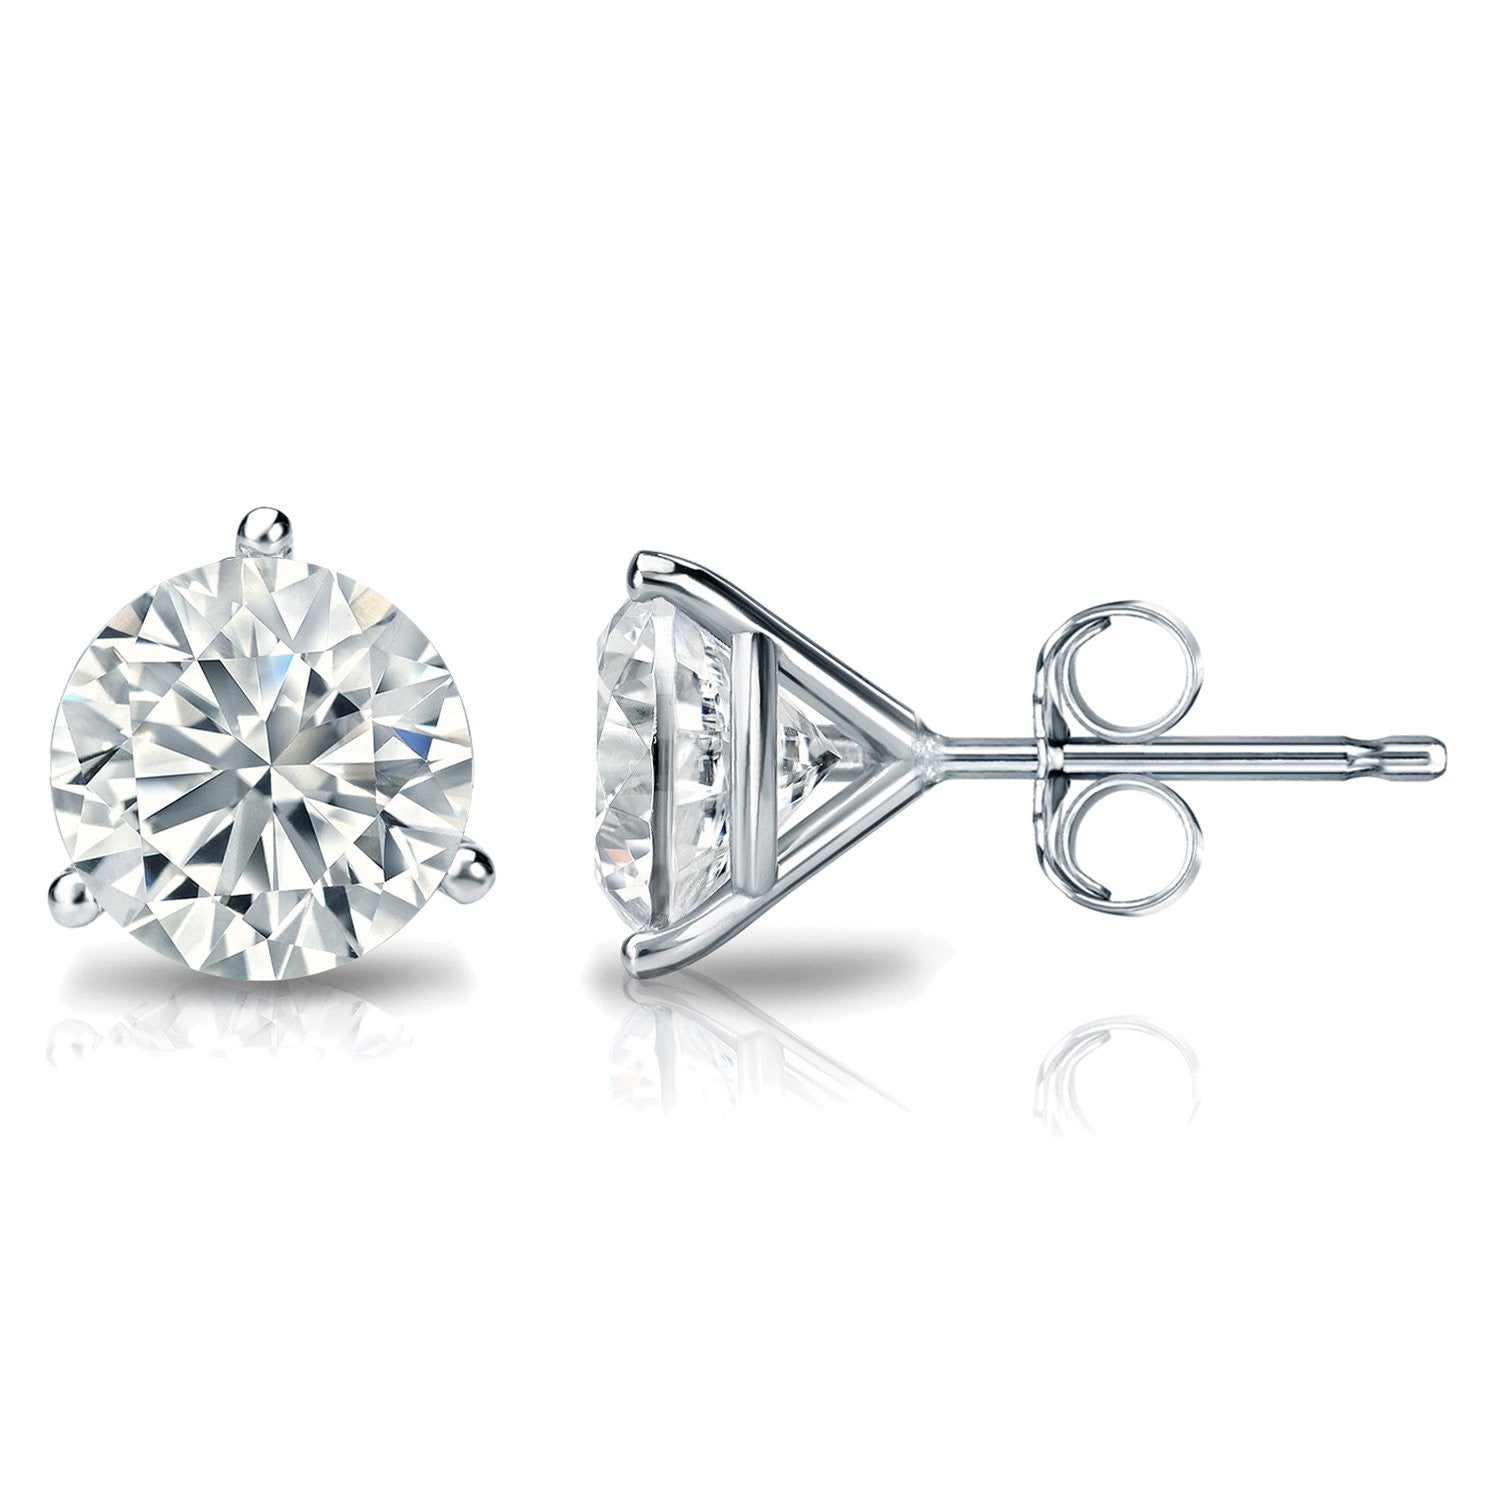 1/4 Carat Round 14K White Gold 3 Prong Martini Set Diamond Solitaire Stud Earrings (Classic Quality)